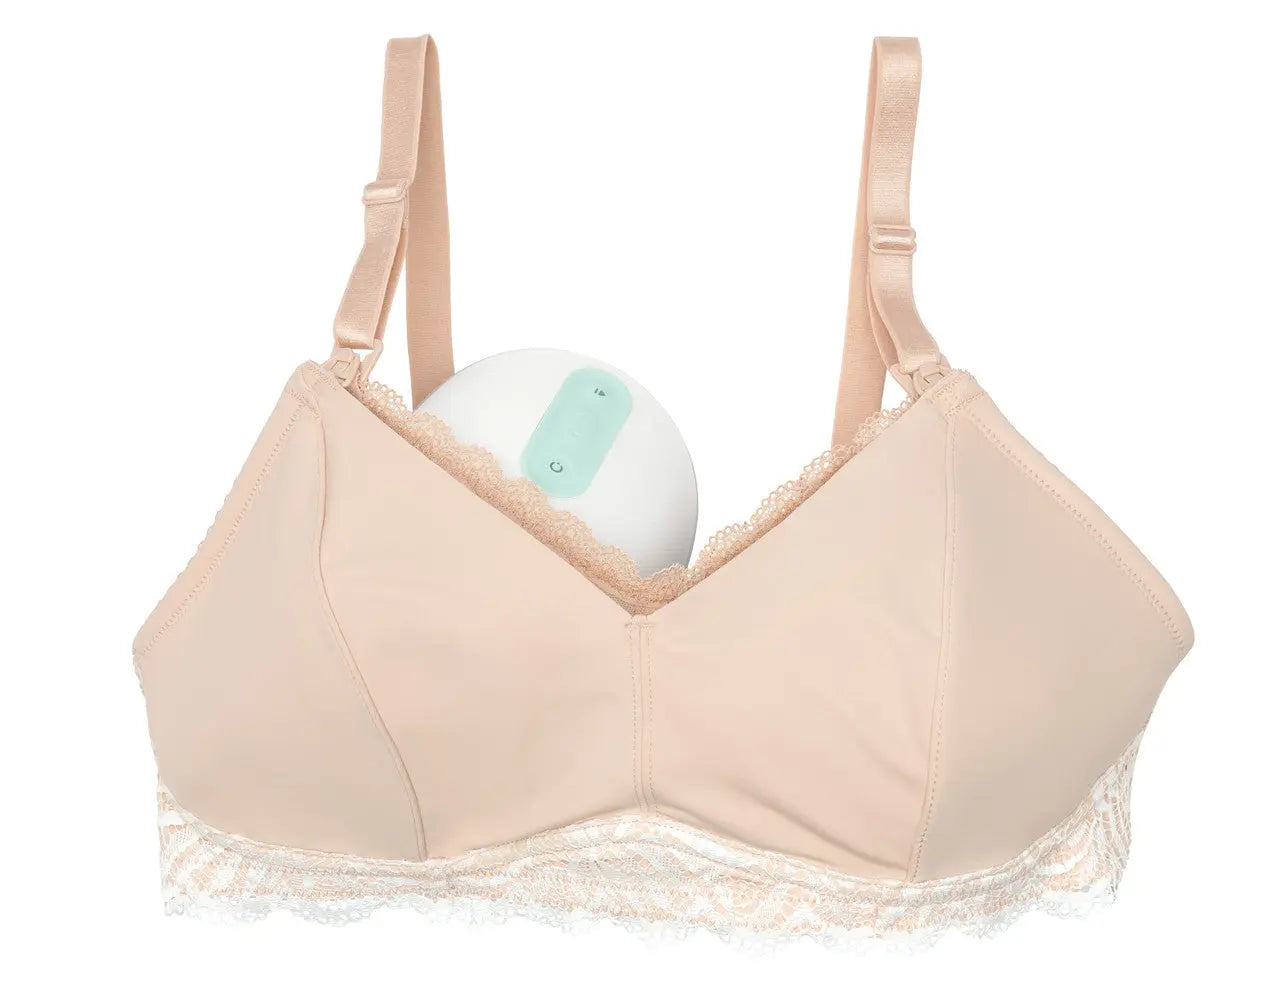 Any ideas on pumping bras for large breasts. Im a 36G.